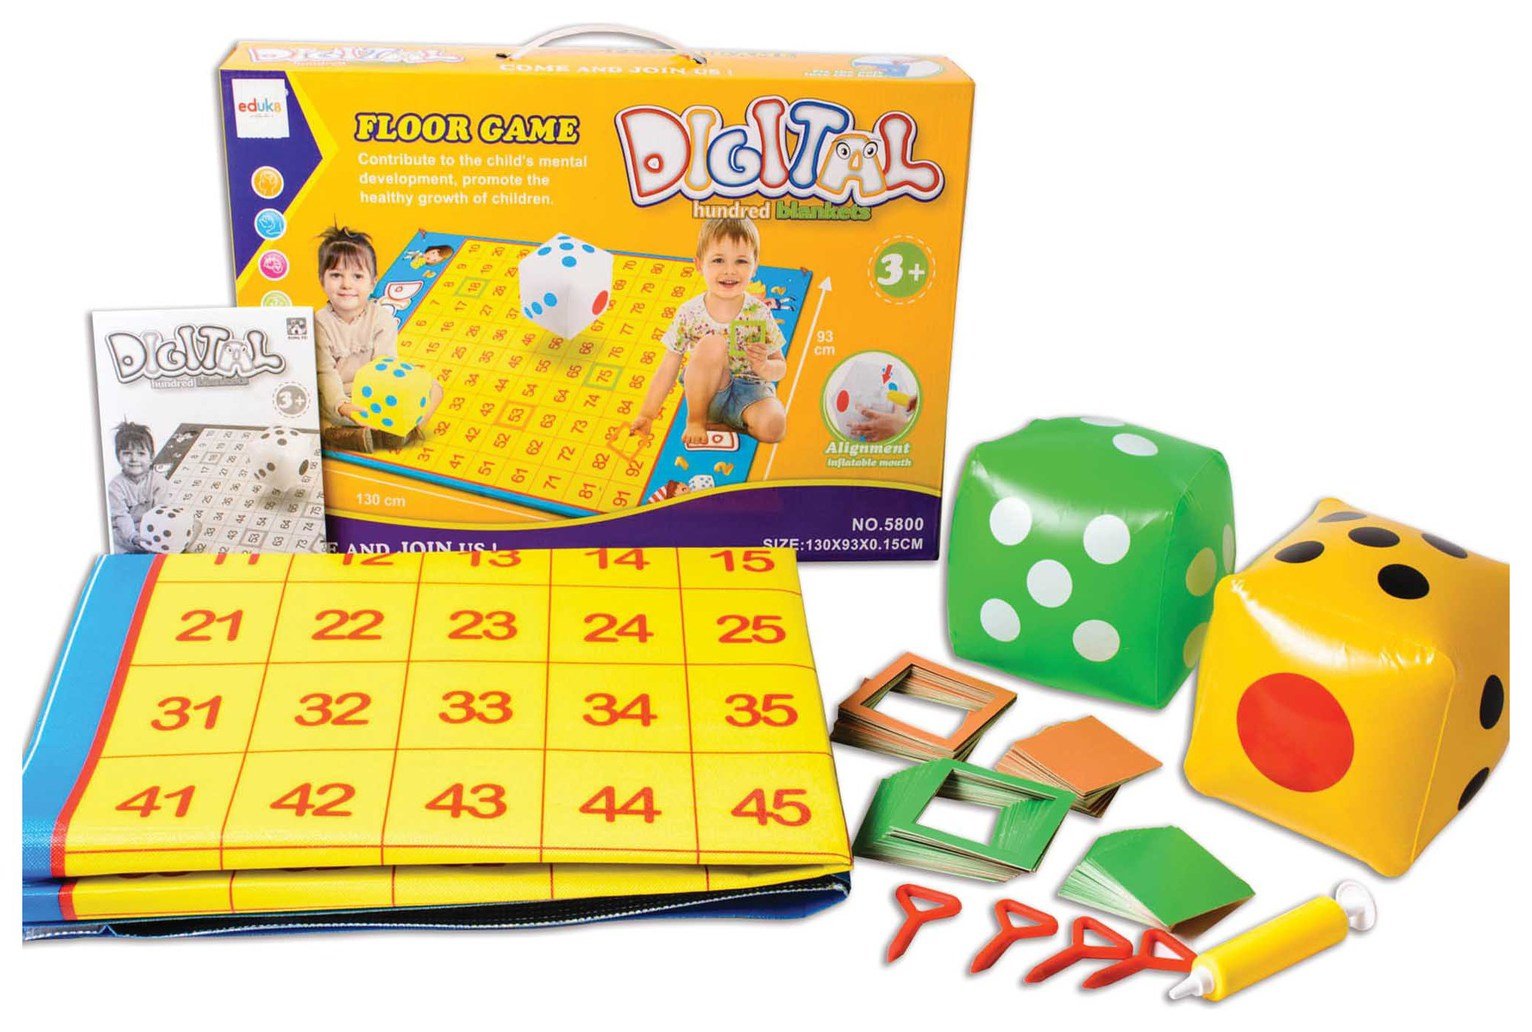 EDUK8 Large 100 Square Learning Game review